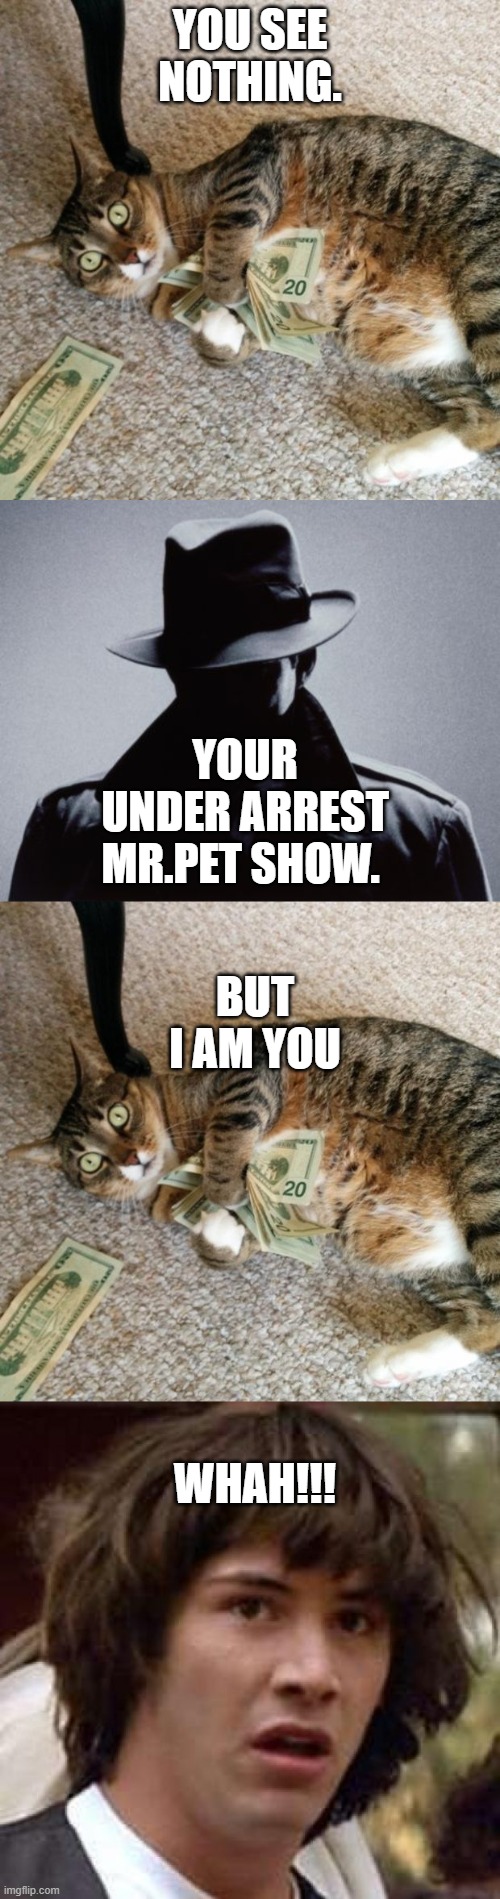 Whah!! | YOU SEE NOTHING. YOUR UNDER ARREST MR.PET SHOW. BUT I AM YOU; WHAH!!! | image tagged in memes,conspiracy keanu,money cat,spy silhouette | made w/ Imgflip meme maker